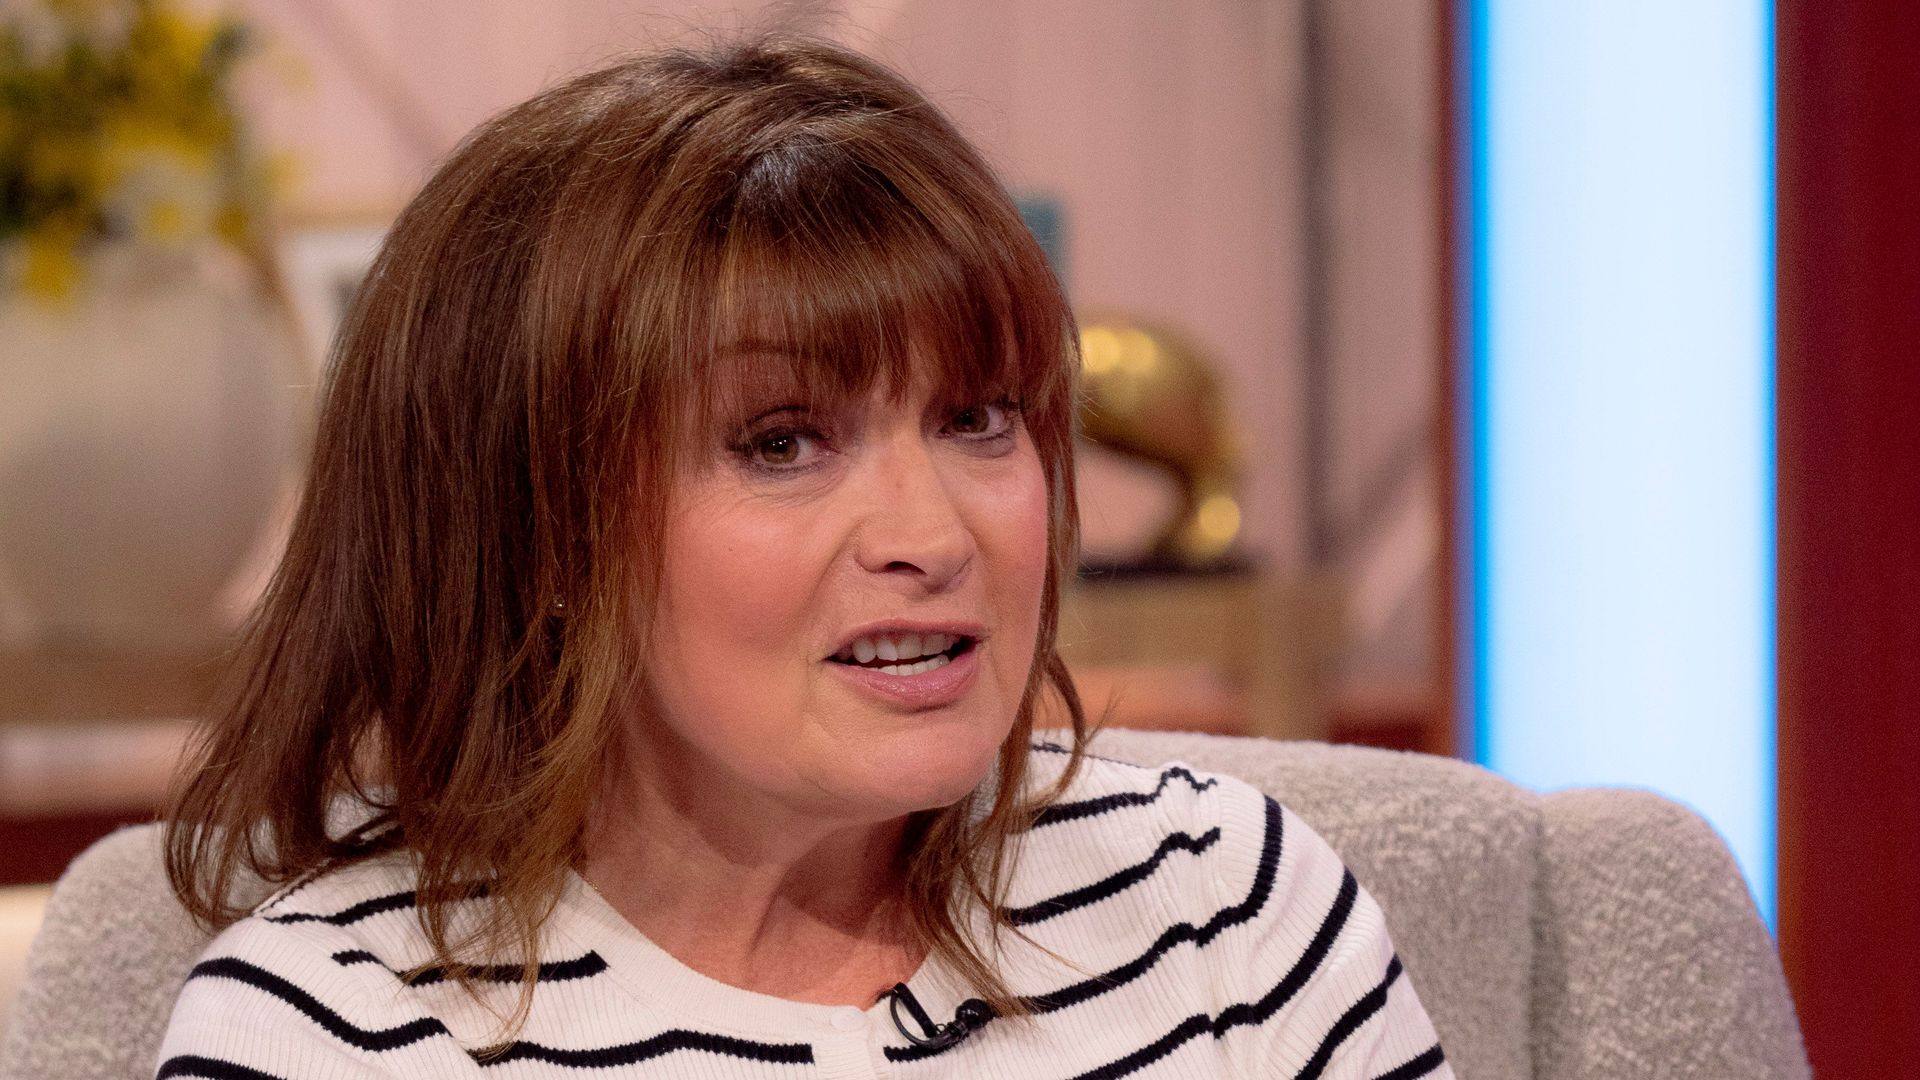 Lorraine Kelly in a striped top on her show